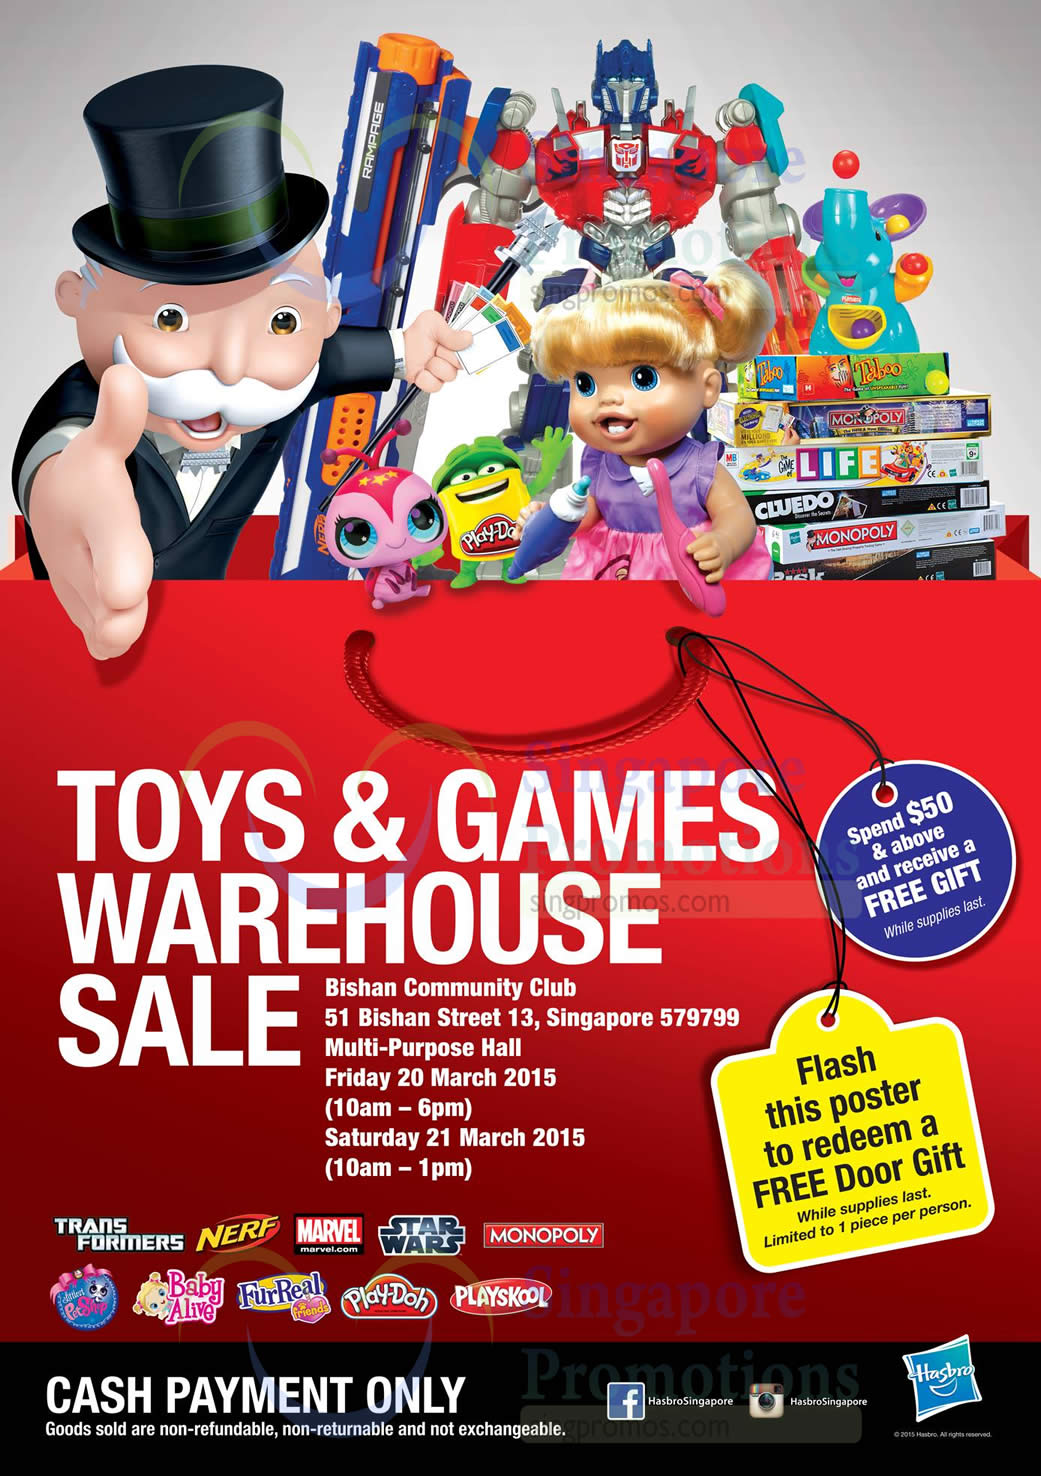 Featured image for Hasbro Toys & Games Warehouse SALE 20 - 21 Mar 2015